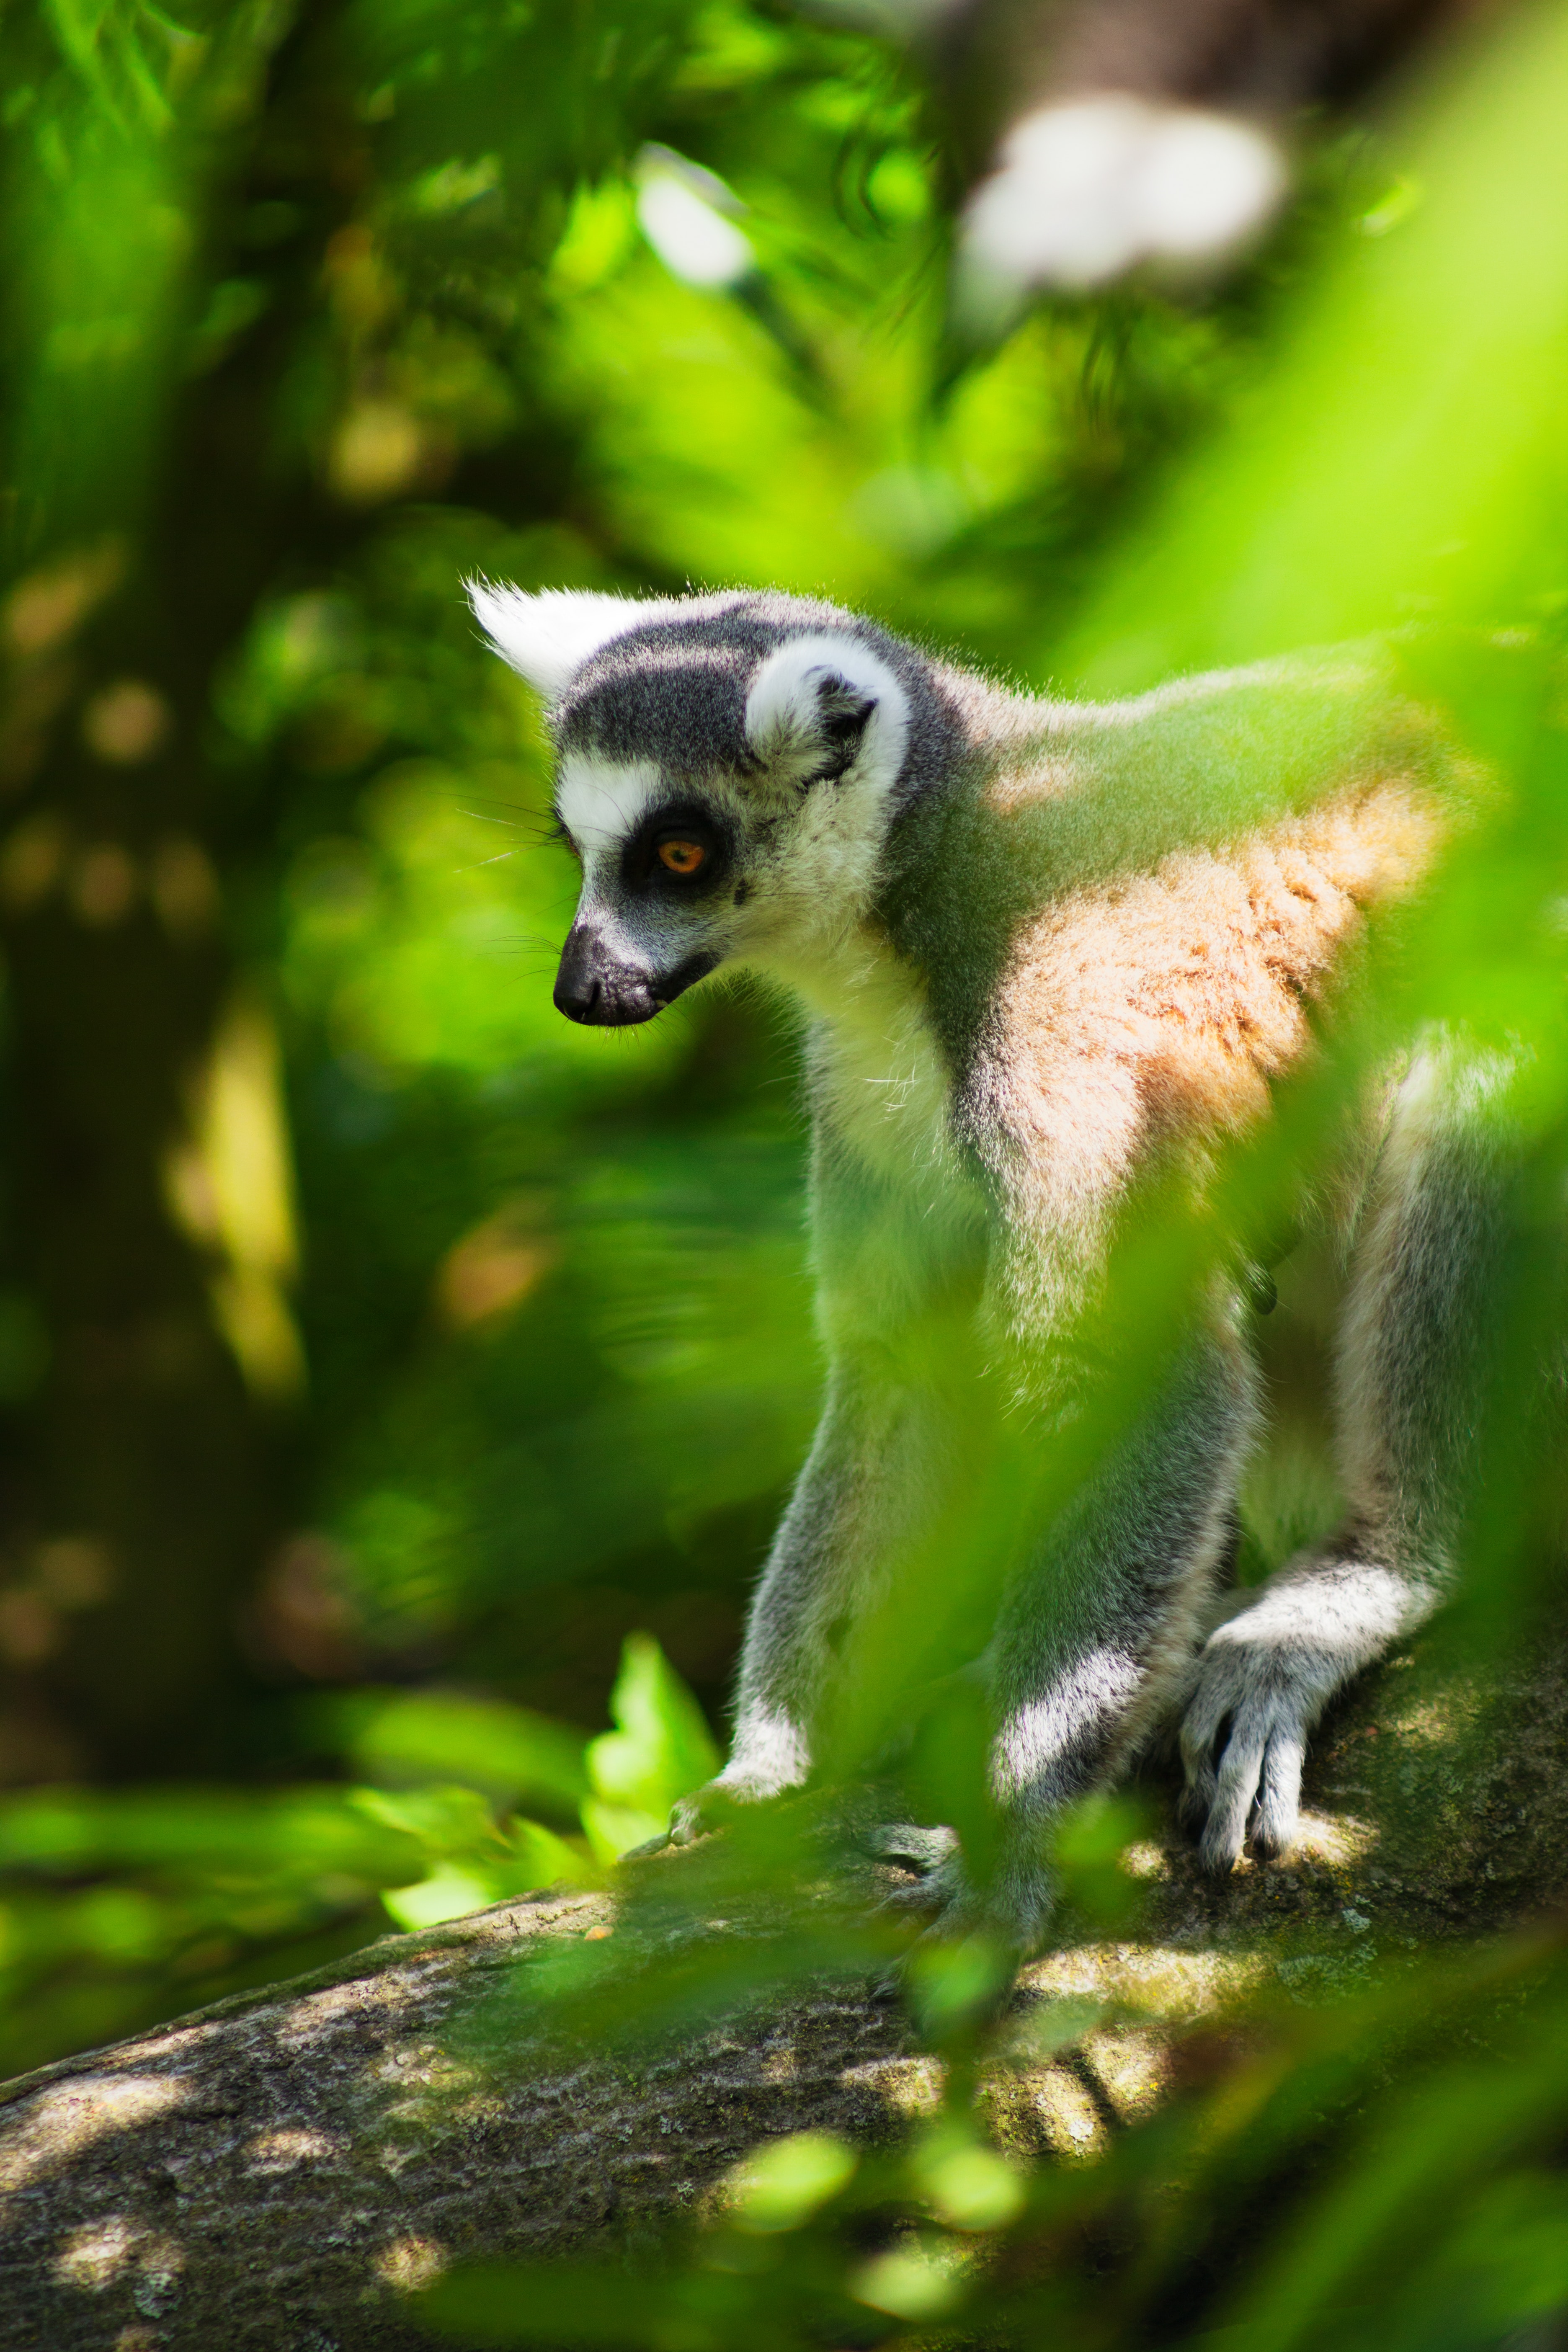 Search for Lemurs on the Island